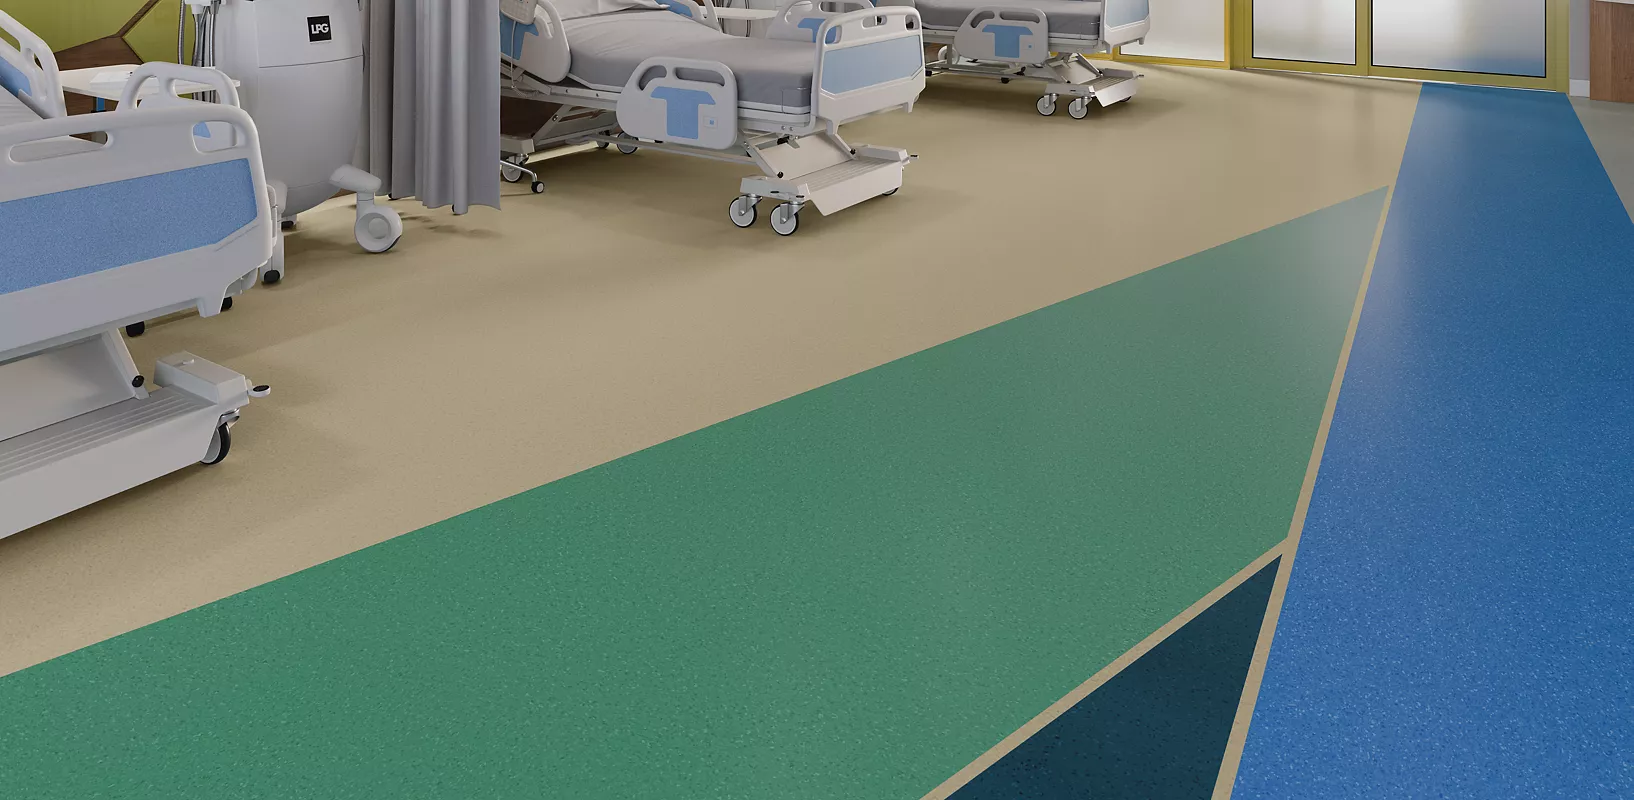 Healthy Environments Homogeneous Resilient Sheet - Medella Hues, H6002, H6014, H6017 - Resilient Sheet